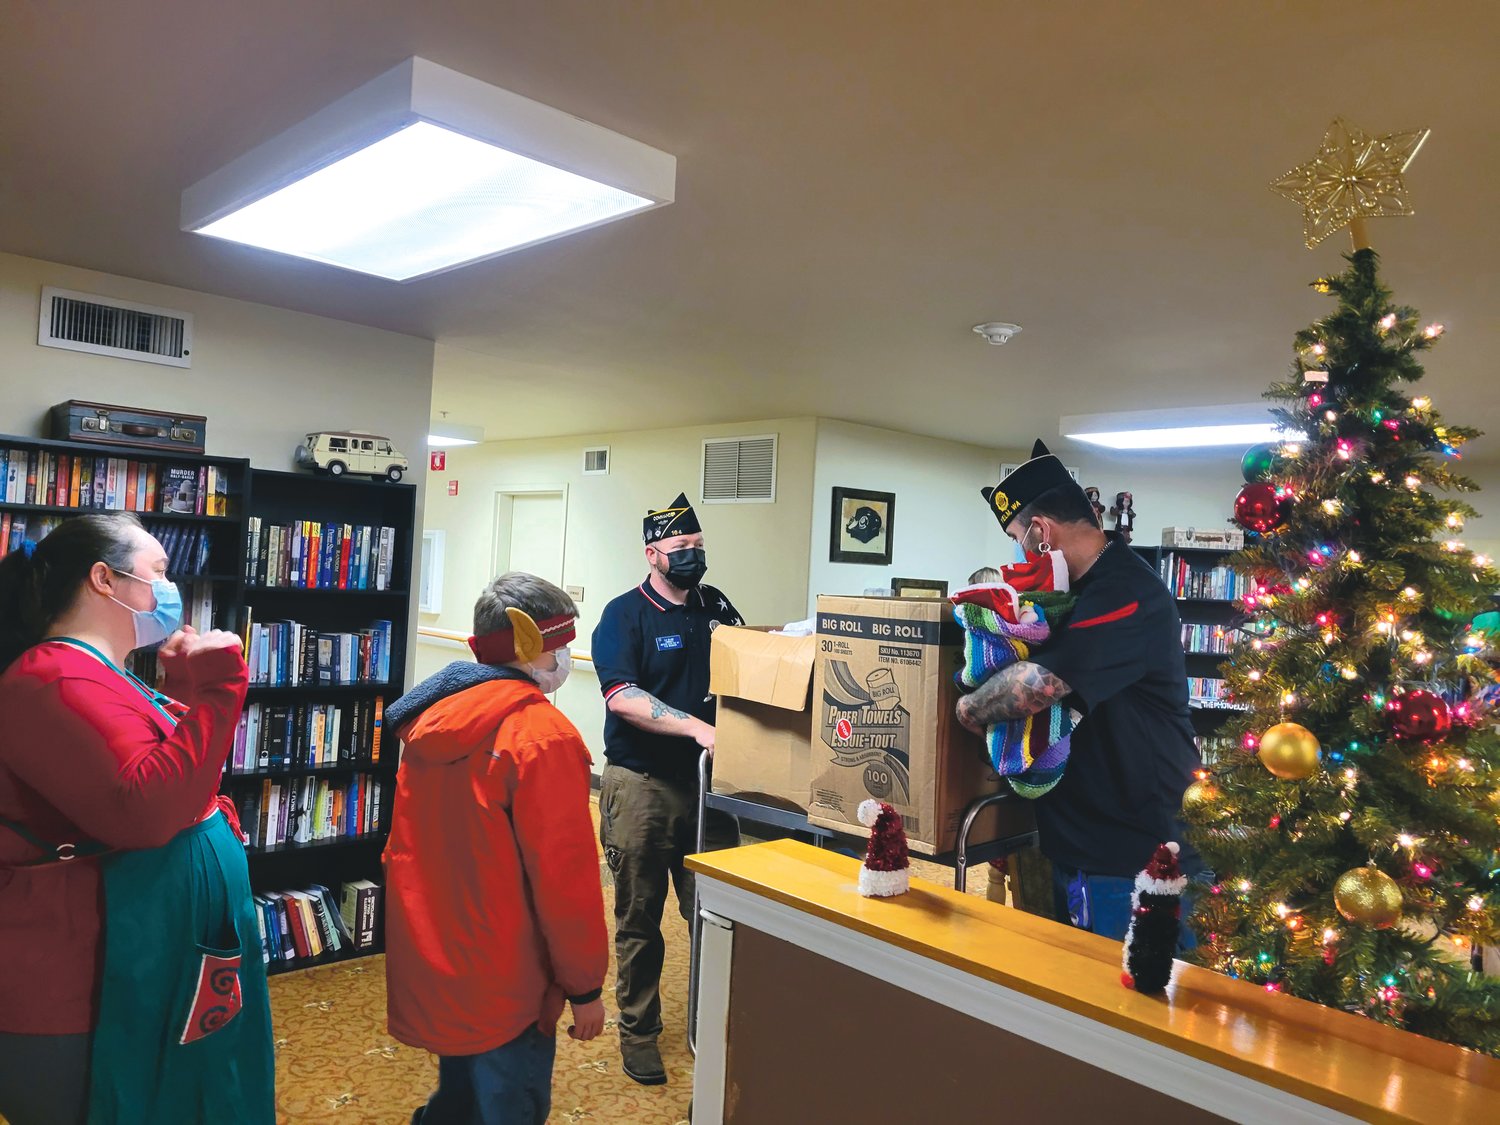 Members of the American Legion Post 164 prepare to hand out stockings to veterans on Tuesday, Dec. 21.